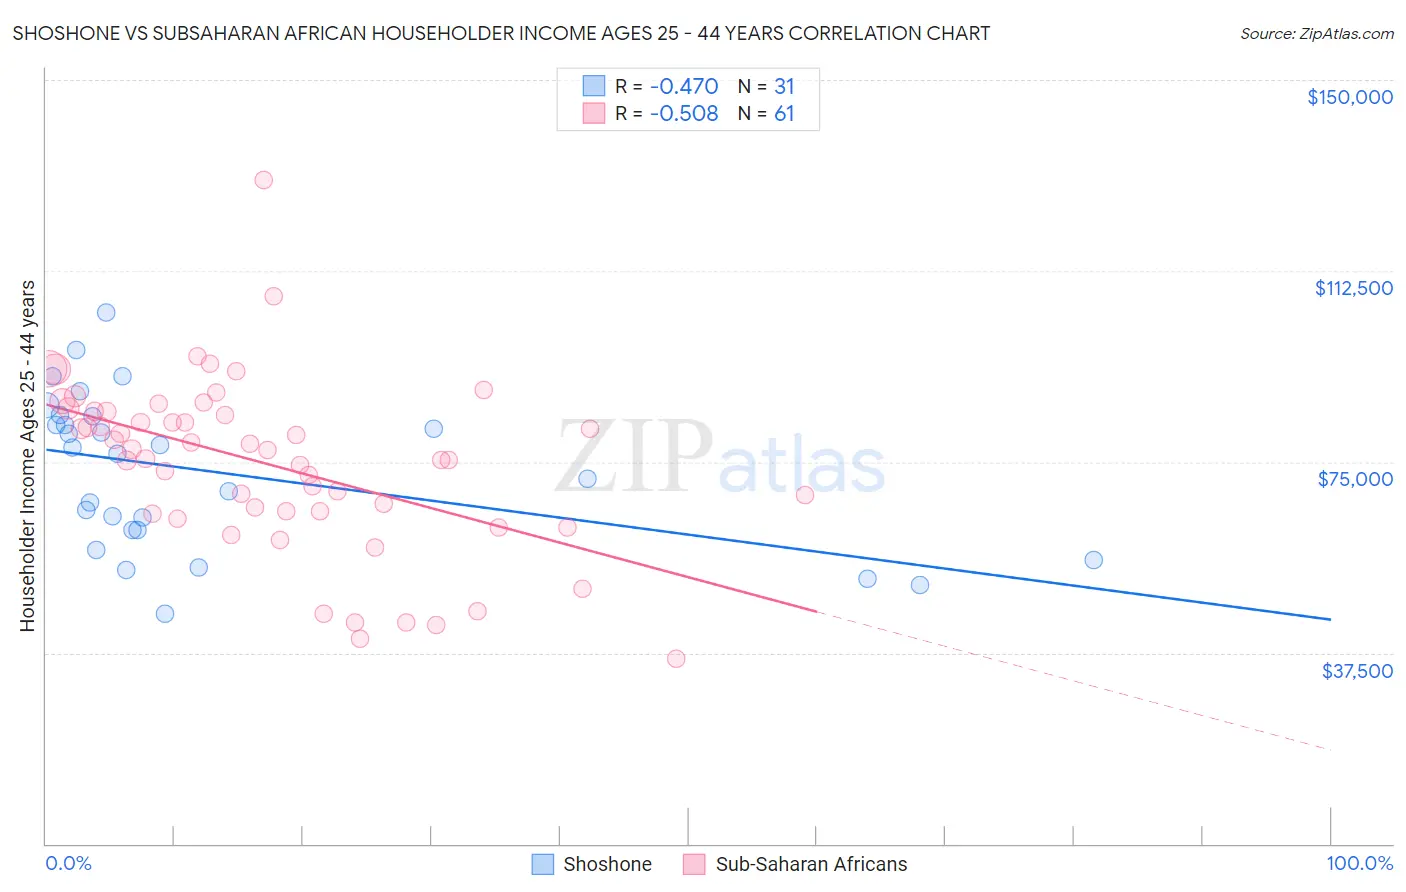 Shoshone vs Subsaharan African Householder Income Ages 25 - 44 years